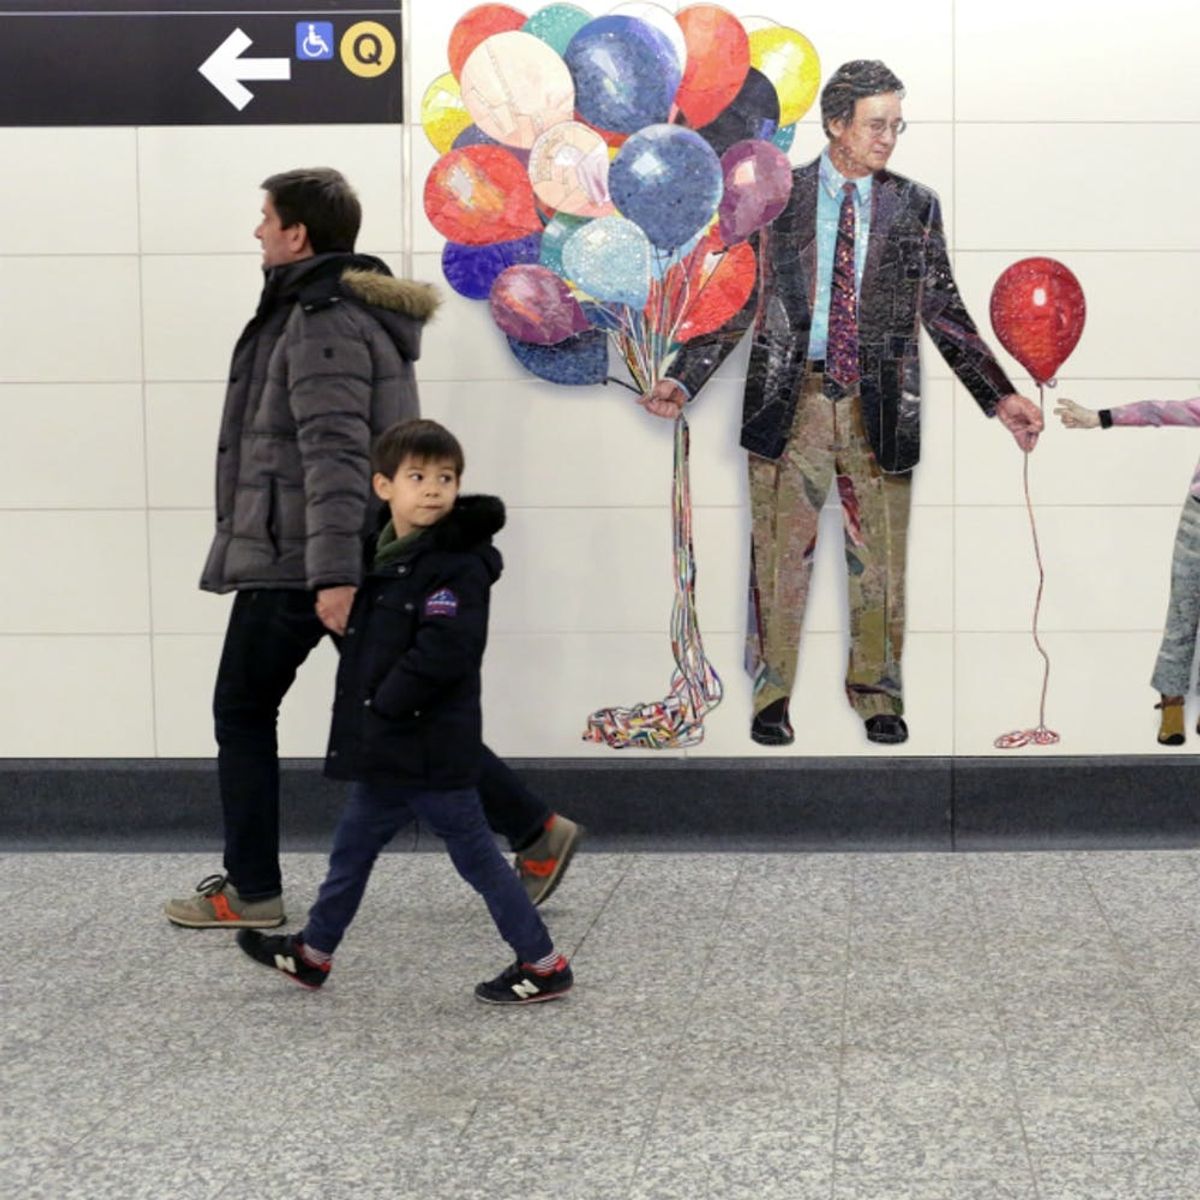 New York’s 2nd Ave Subway Art Will Change How You Look at Strangers